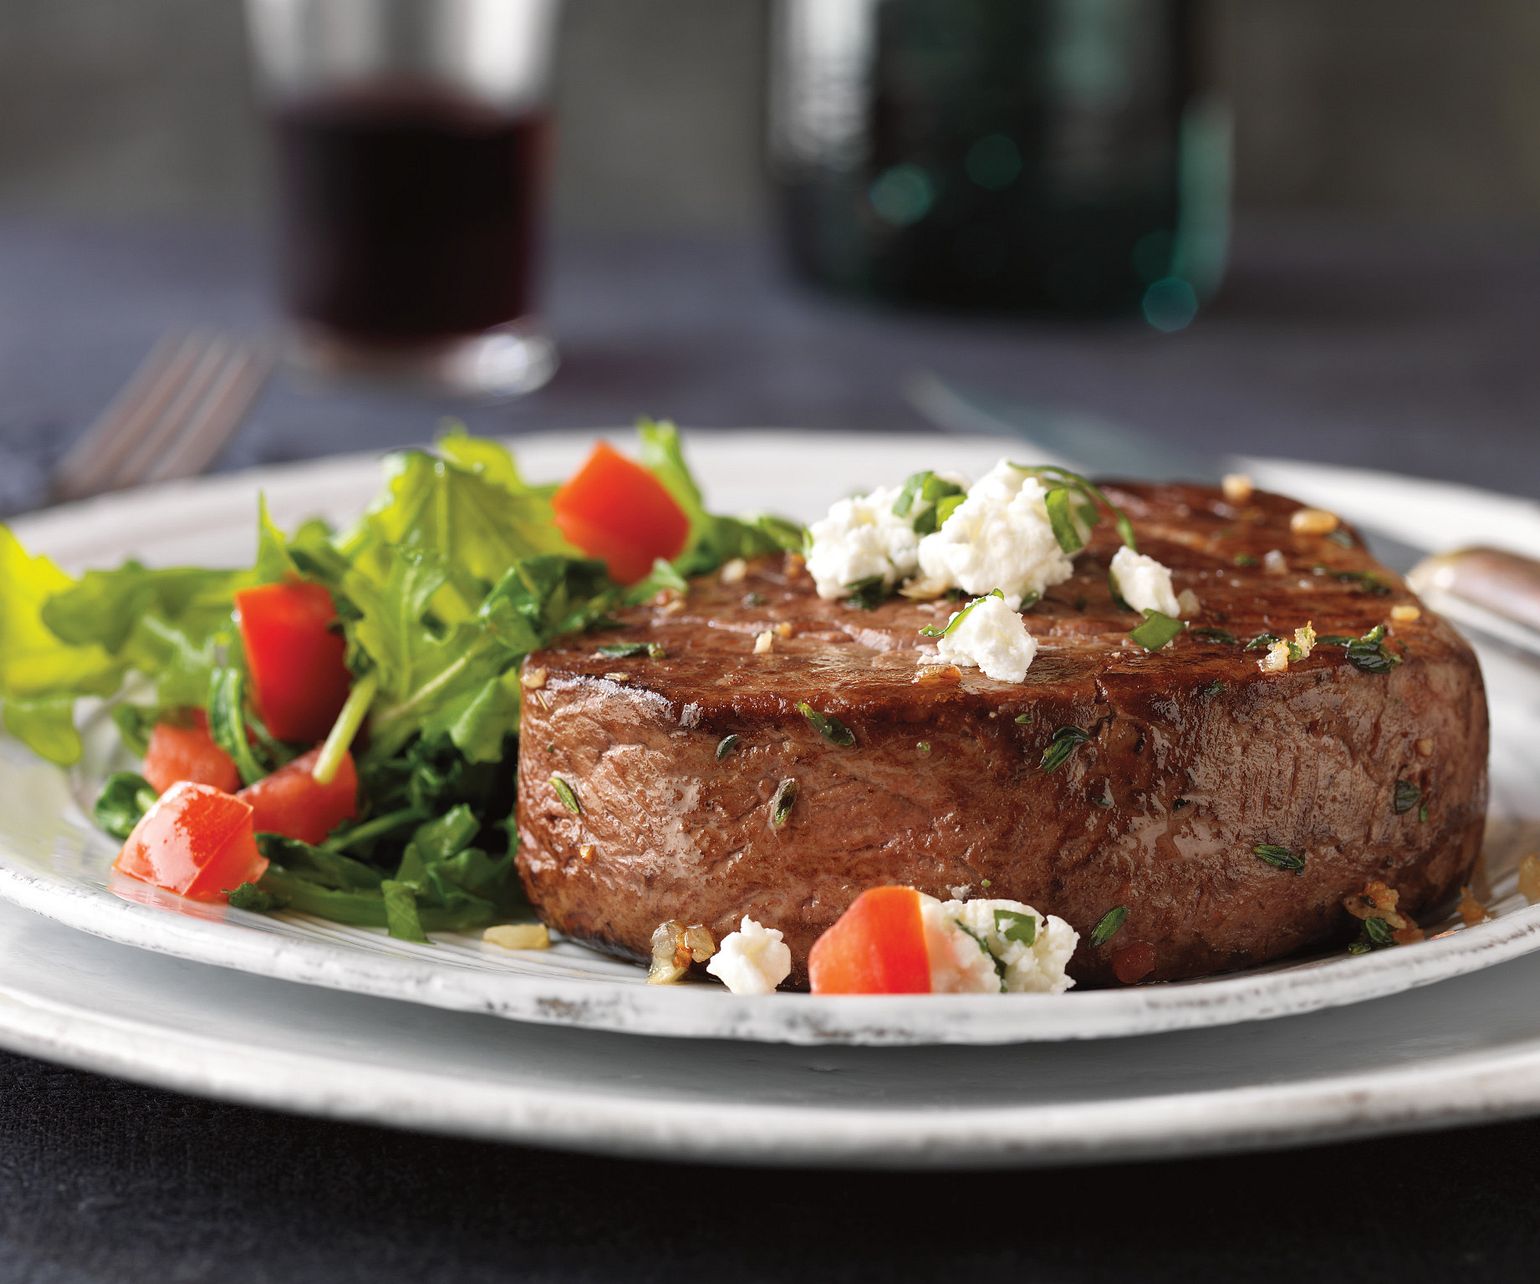 Herbed Tenderloin Steaks with Goat Cheese Topping